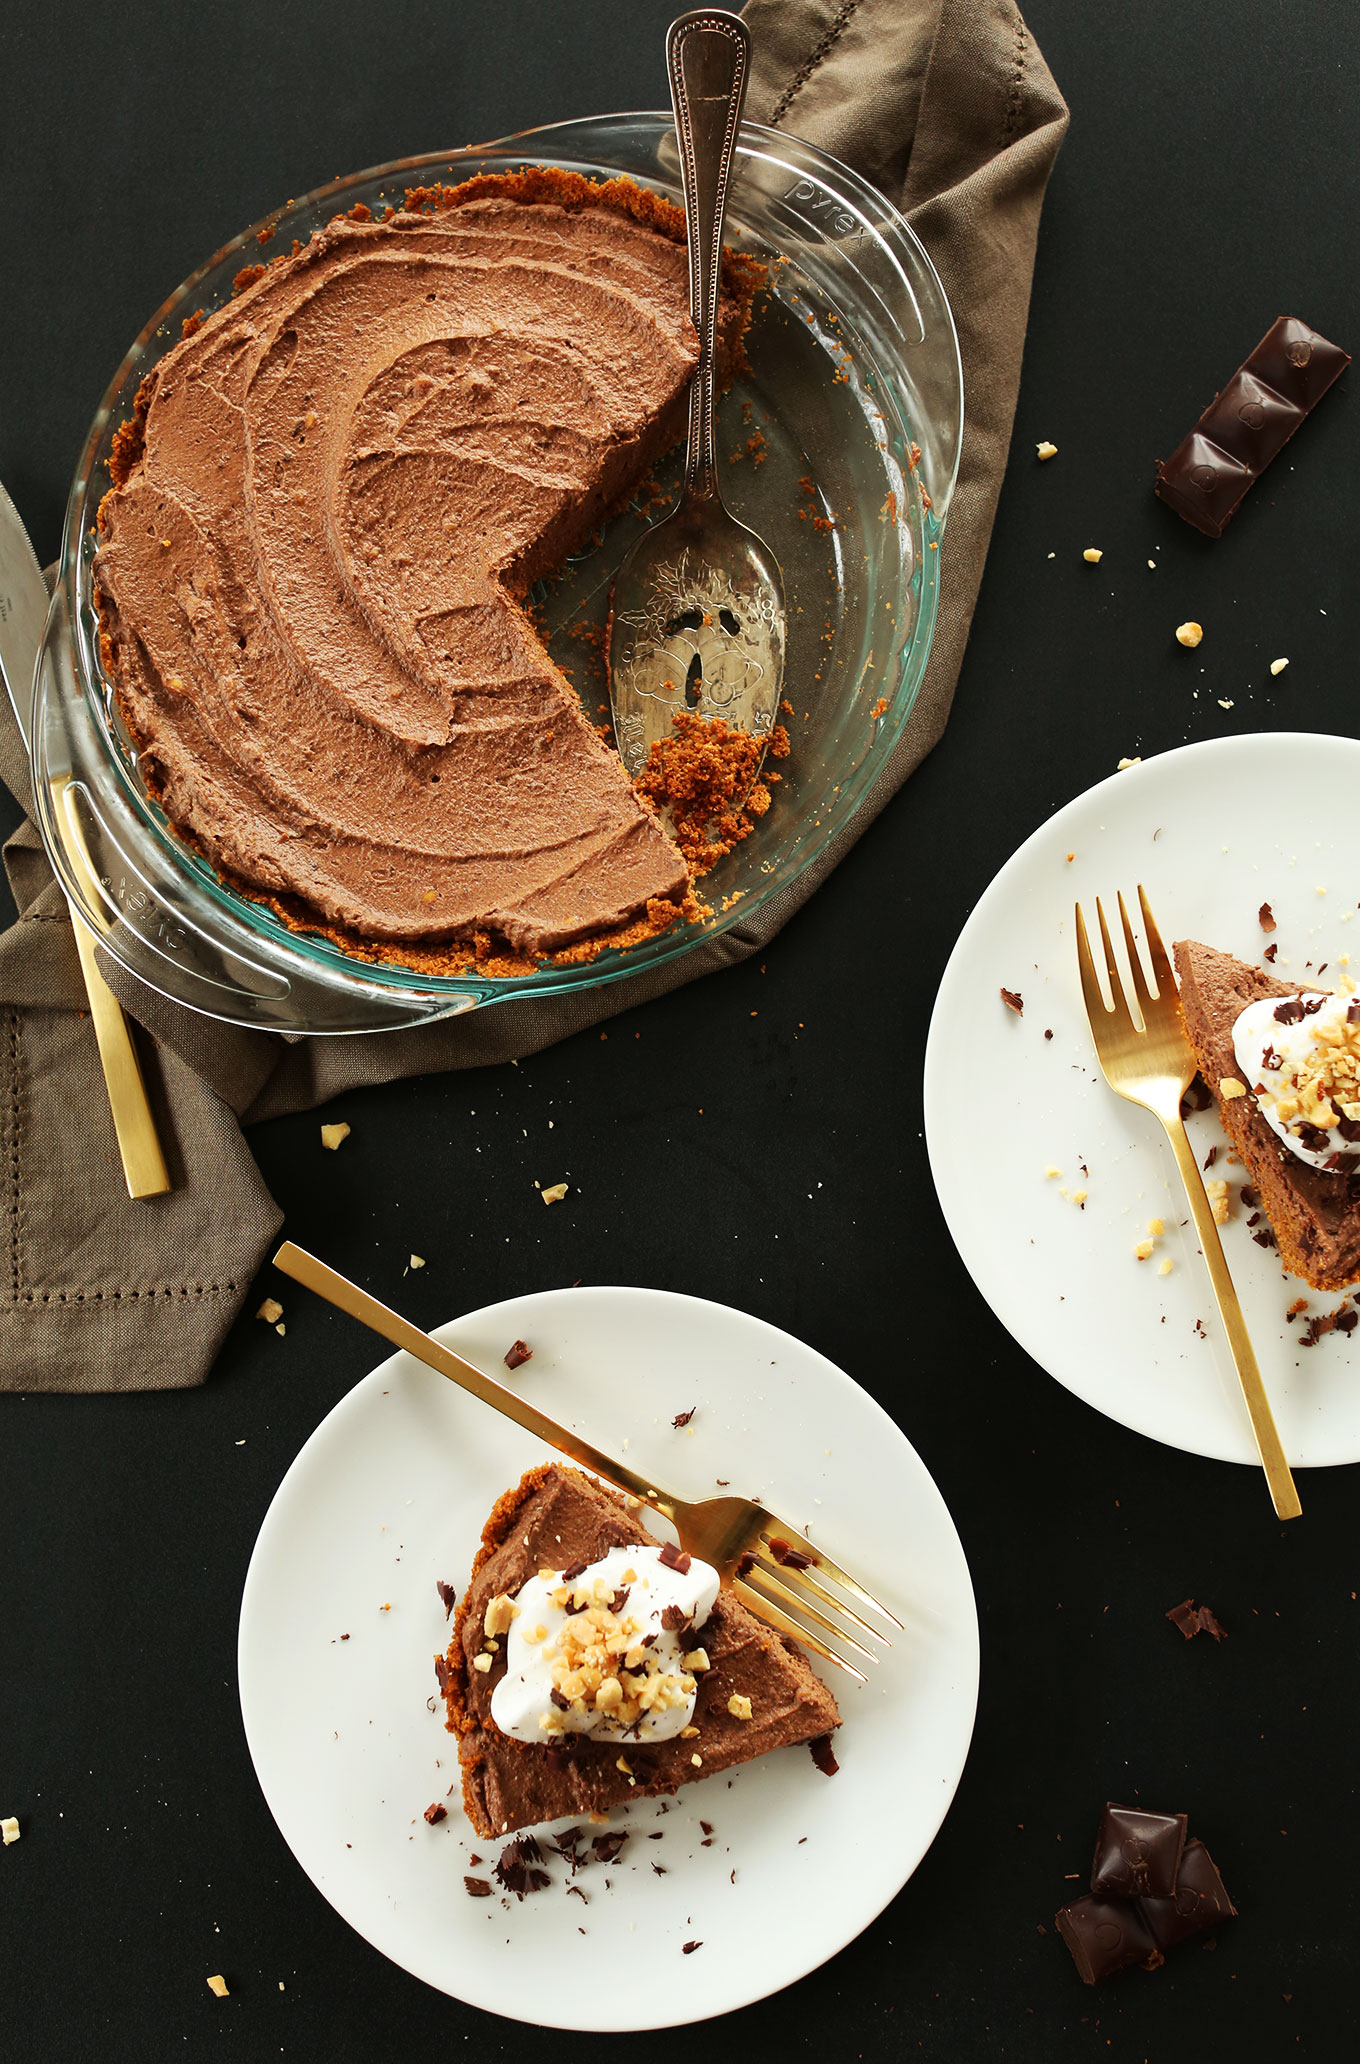 Plates with slices of our delicious Vegan Chocolate Peanut Butter Mousse recipe